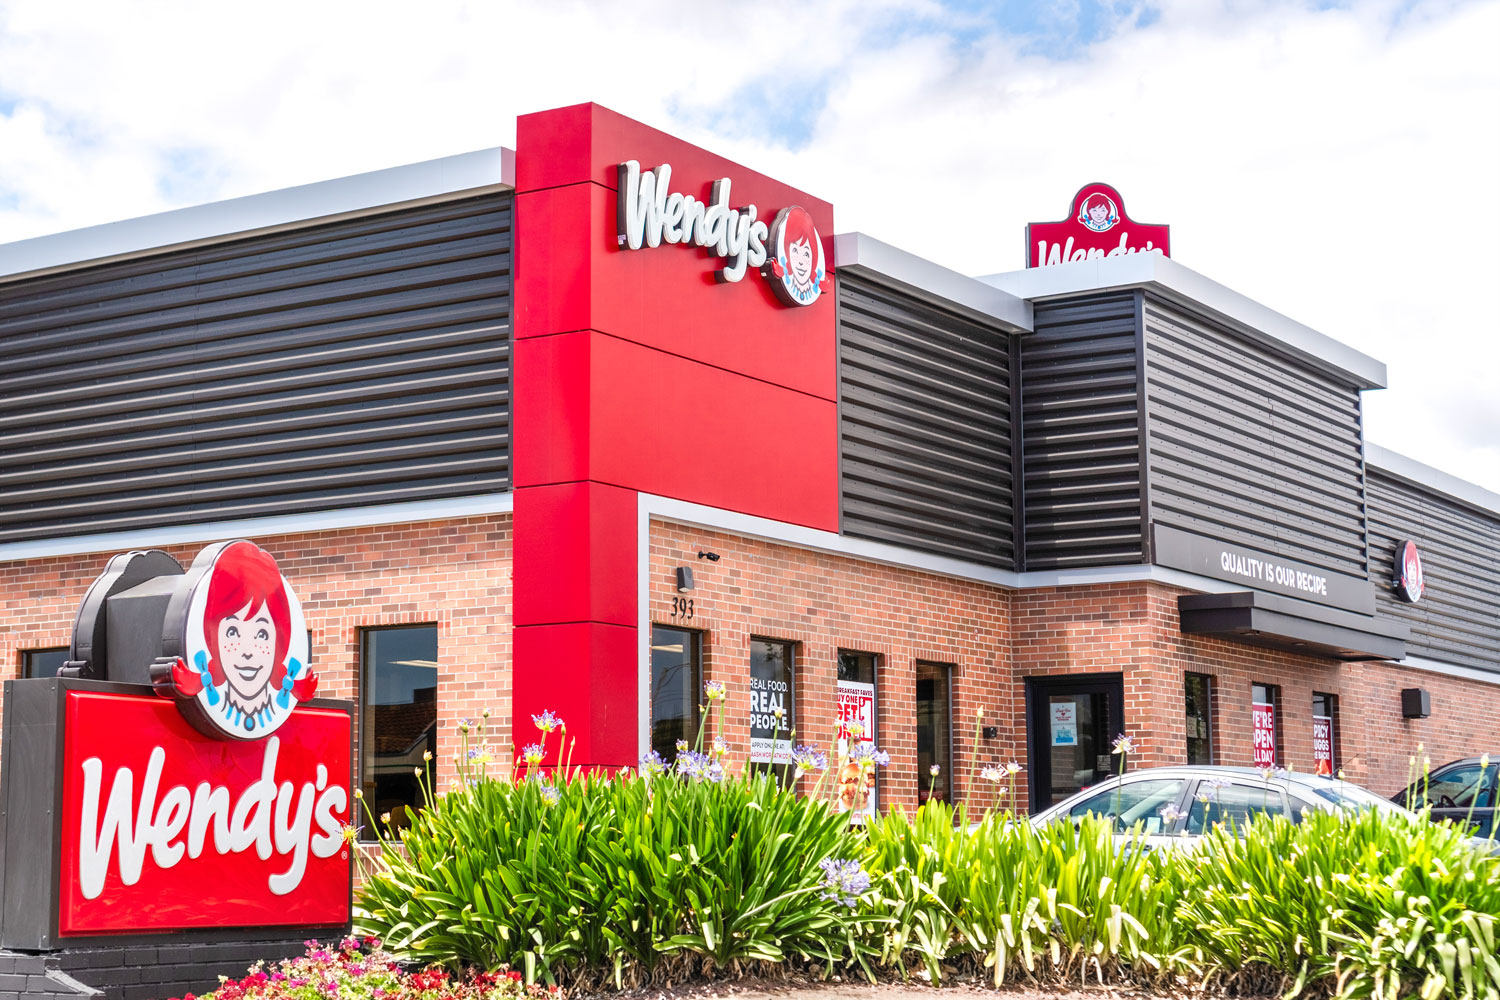 The exterior of a Wendy’s restaurant.